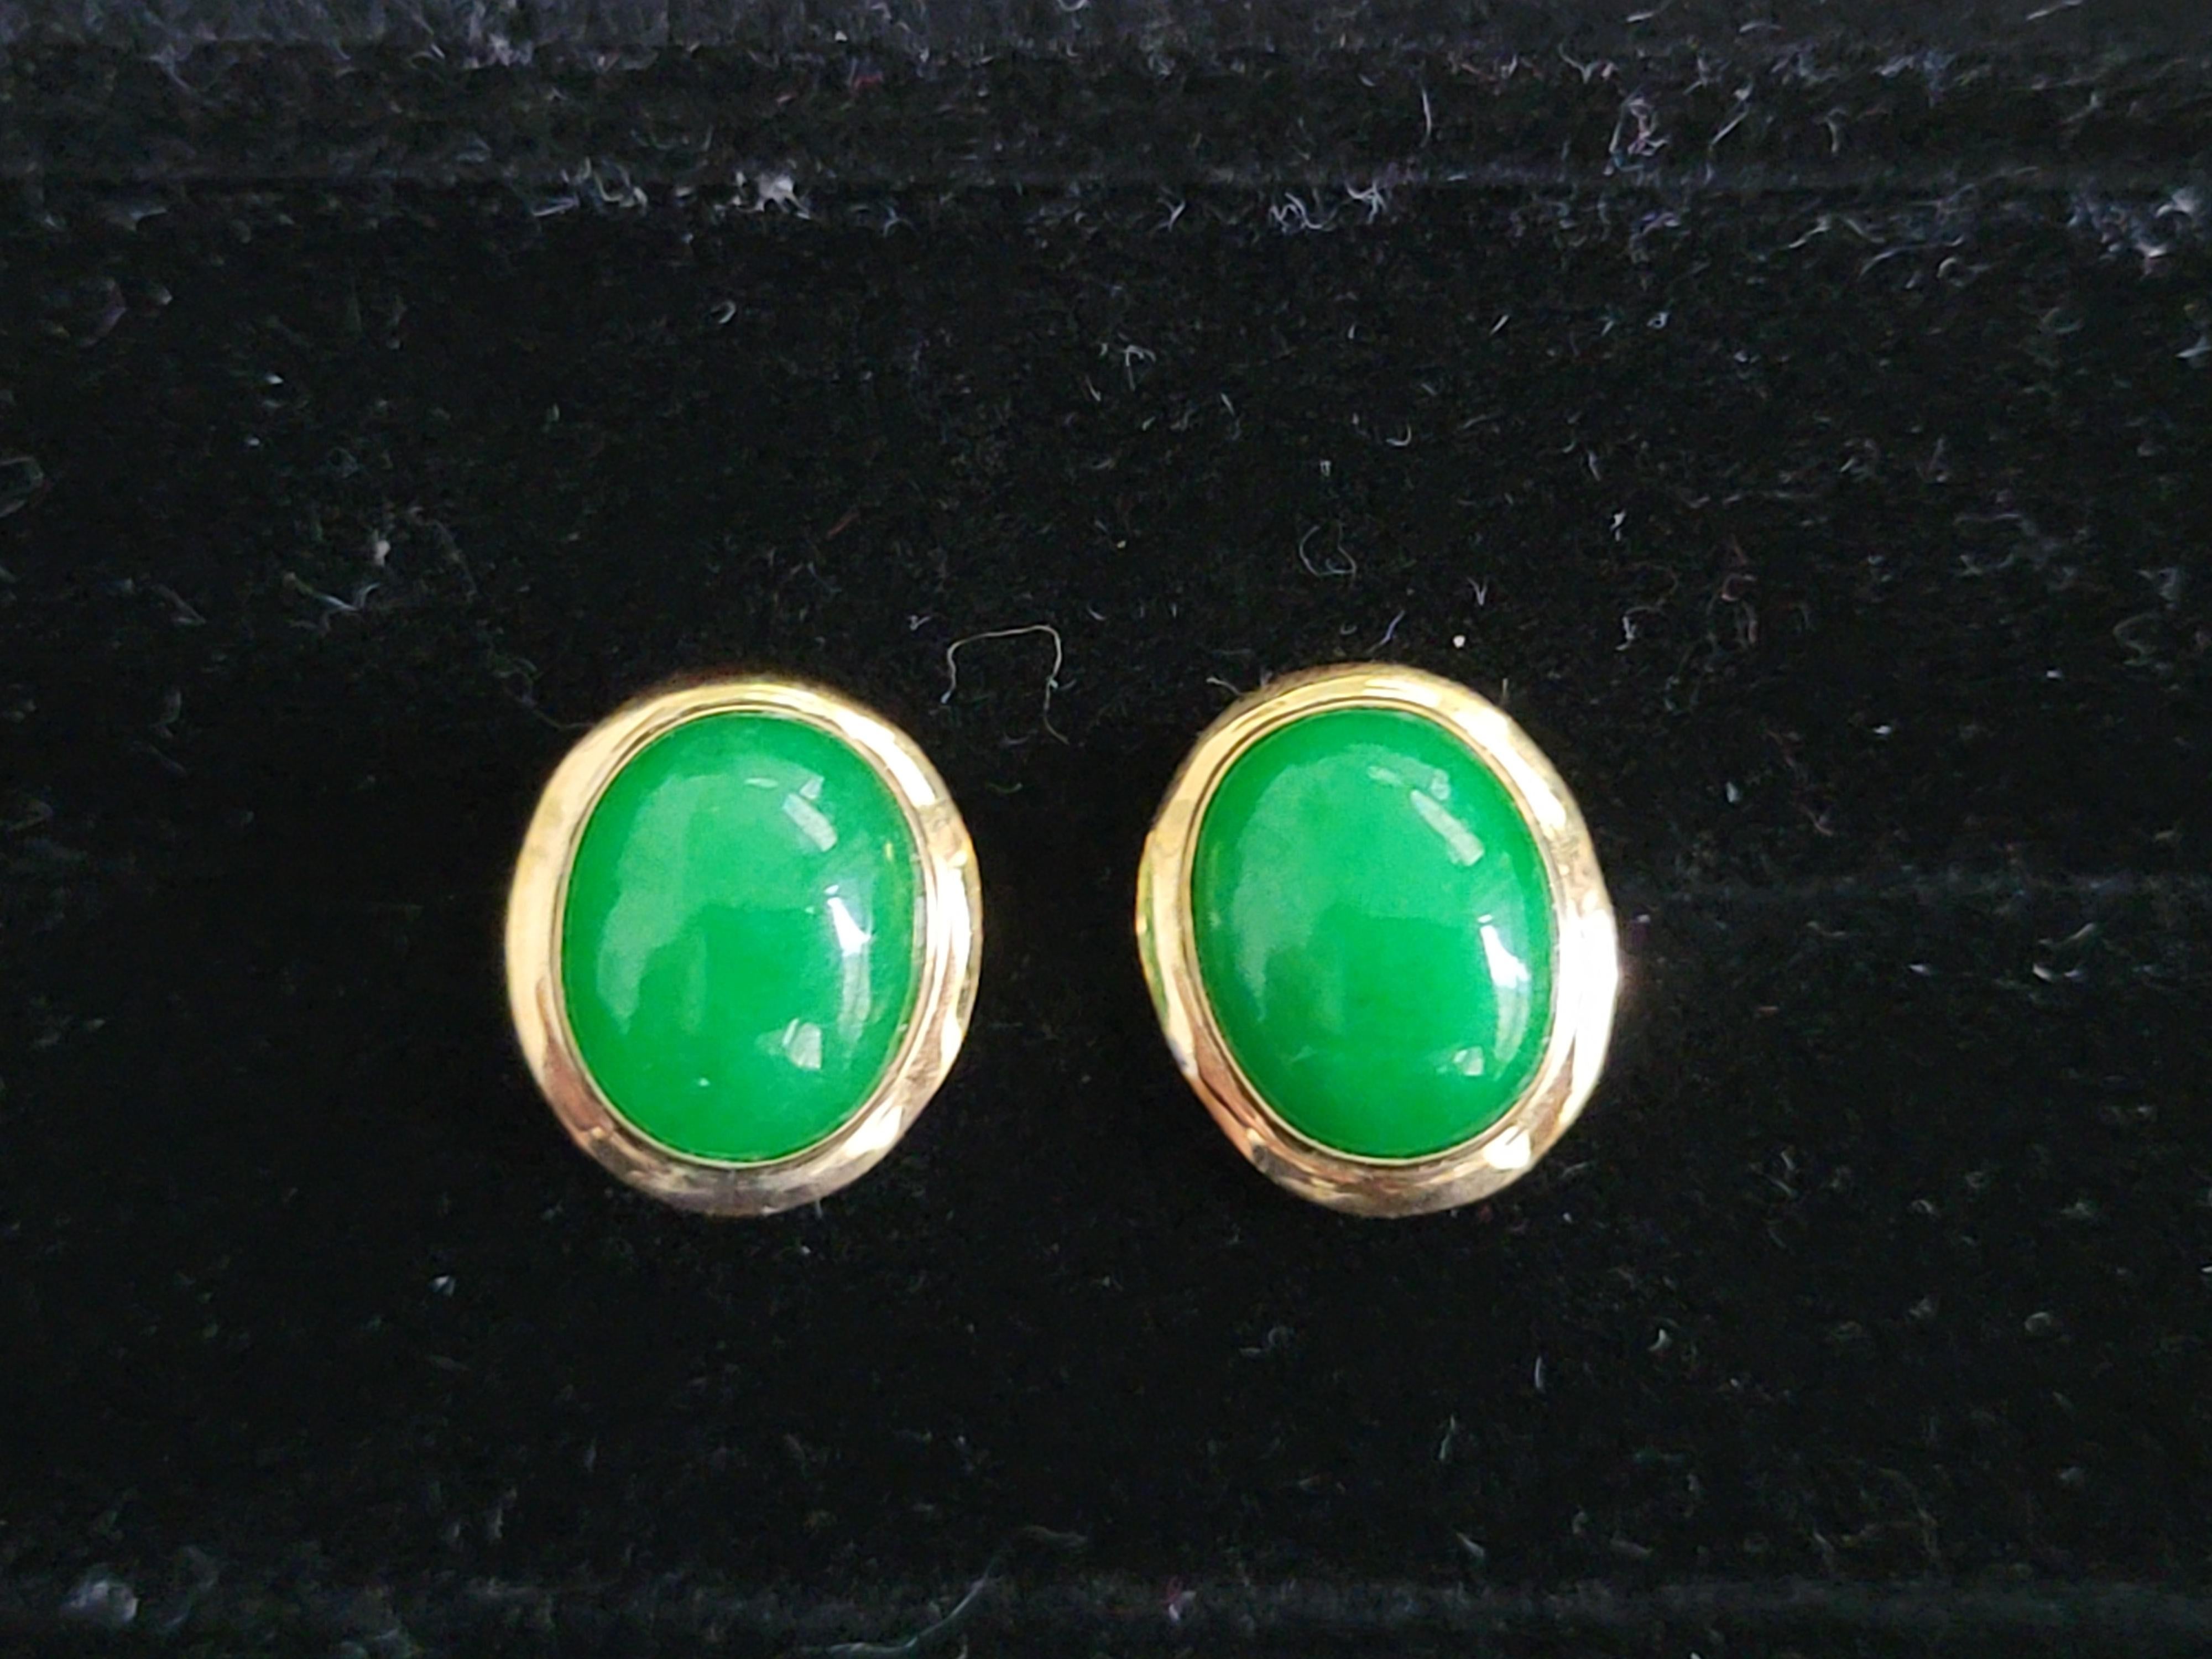 Qīng Zhong Green Jade Stud Earrings with solid 14K Yellow Gold For Sale 1